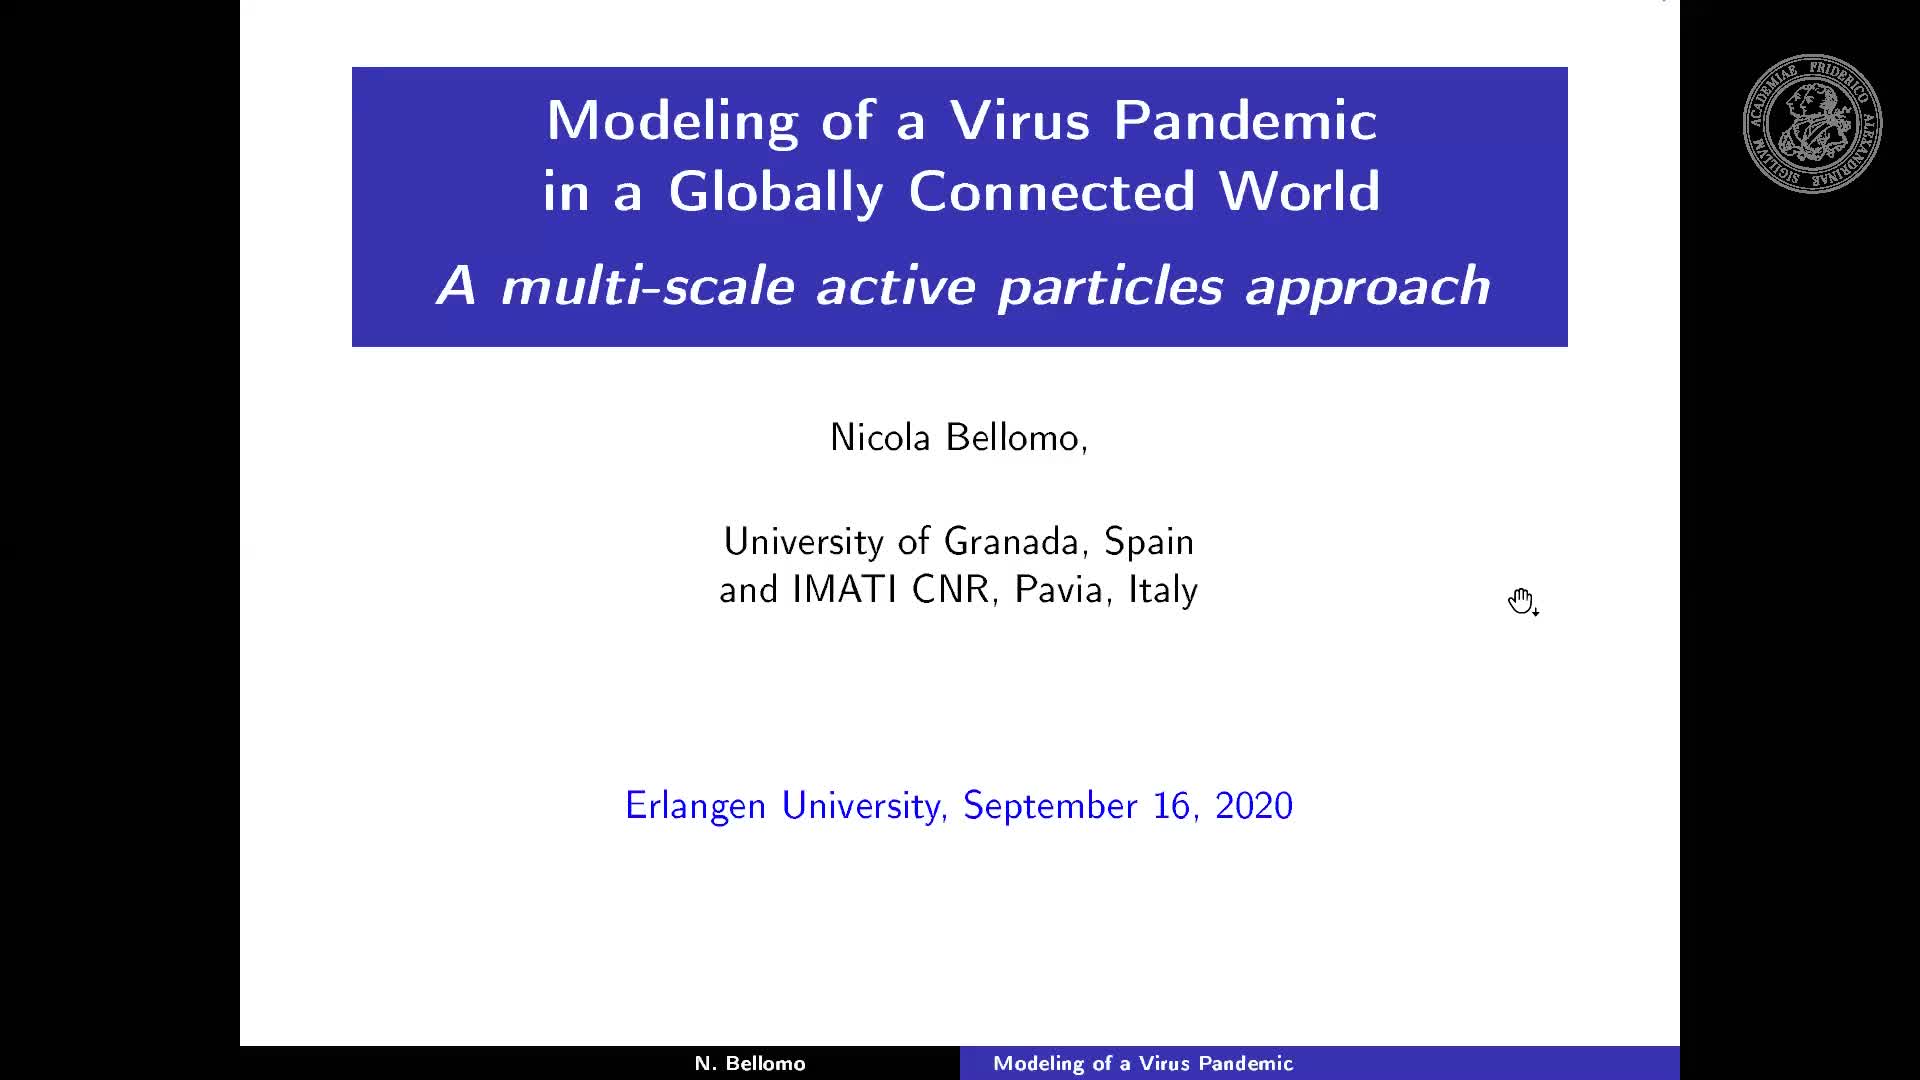 Modeling of a Virus Pandemic in a Globally Connected World: A multi-scale active particles approach (Nicola Bellomo, University of Granada) preview image